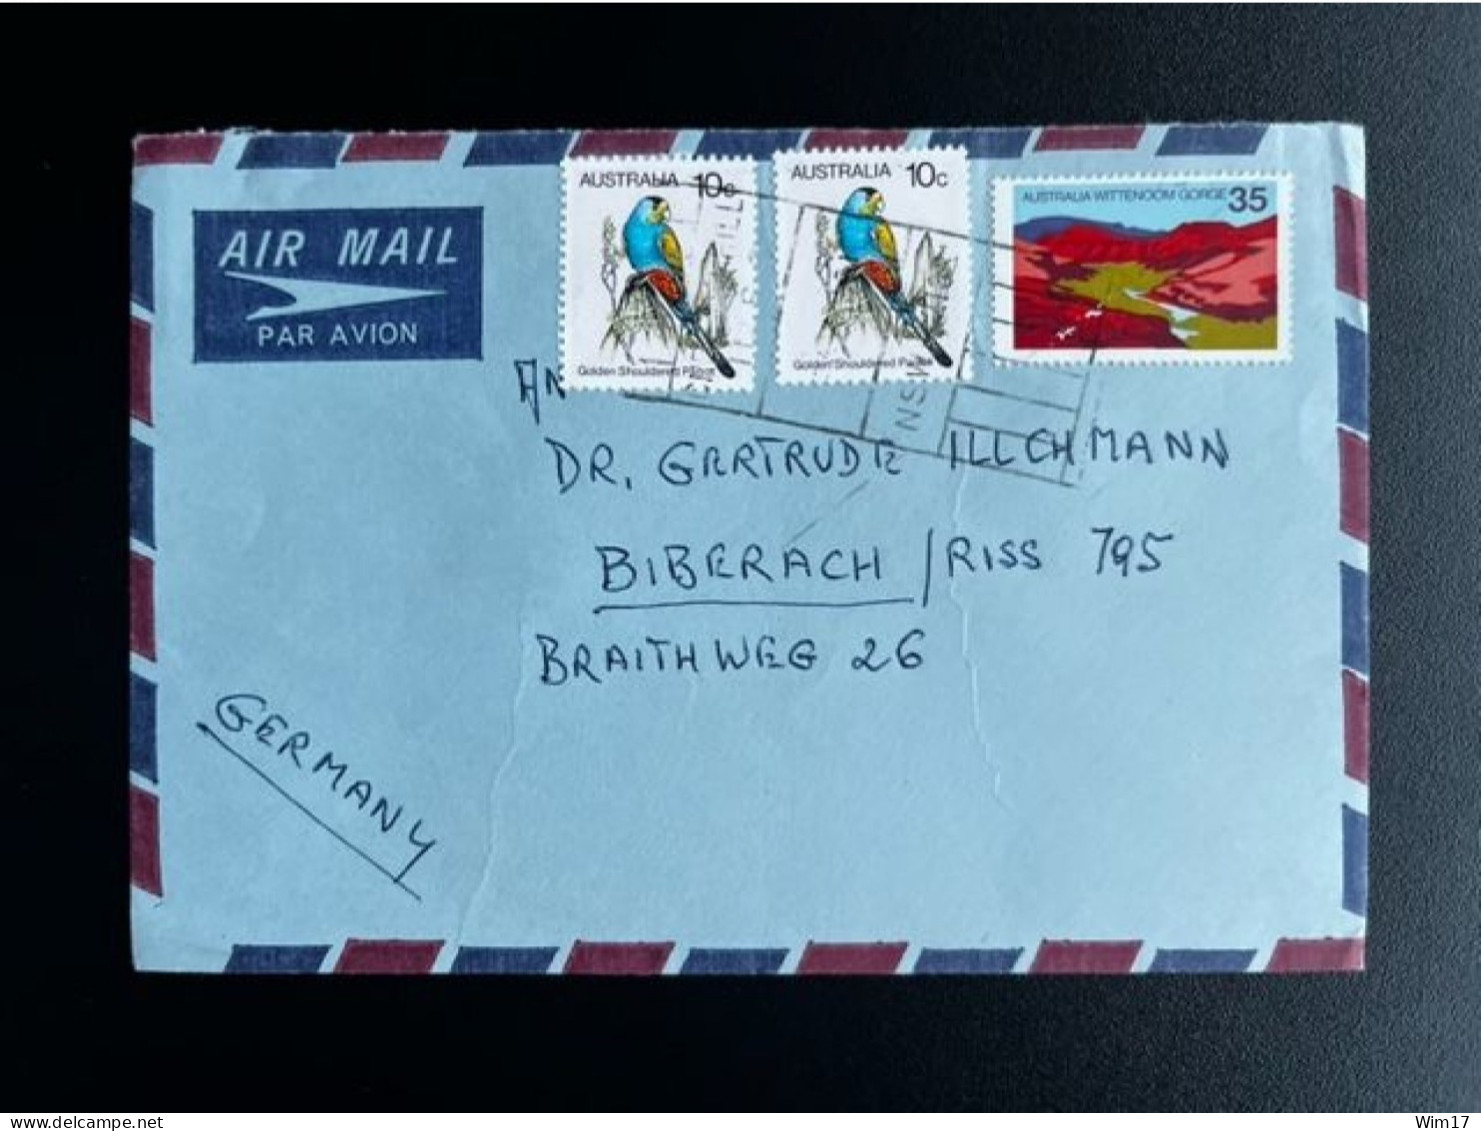 AUSTRALIA AIR MAIL LETTER TO BIBERACH GERMANY - Covers & Documents